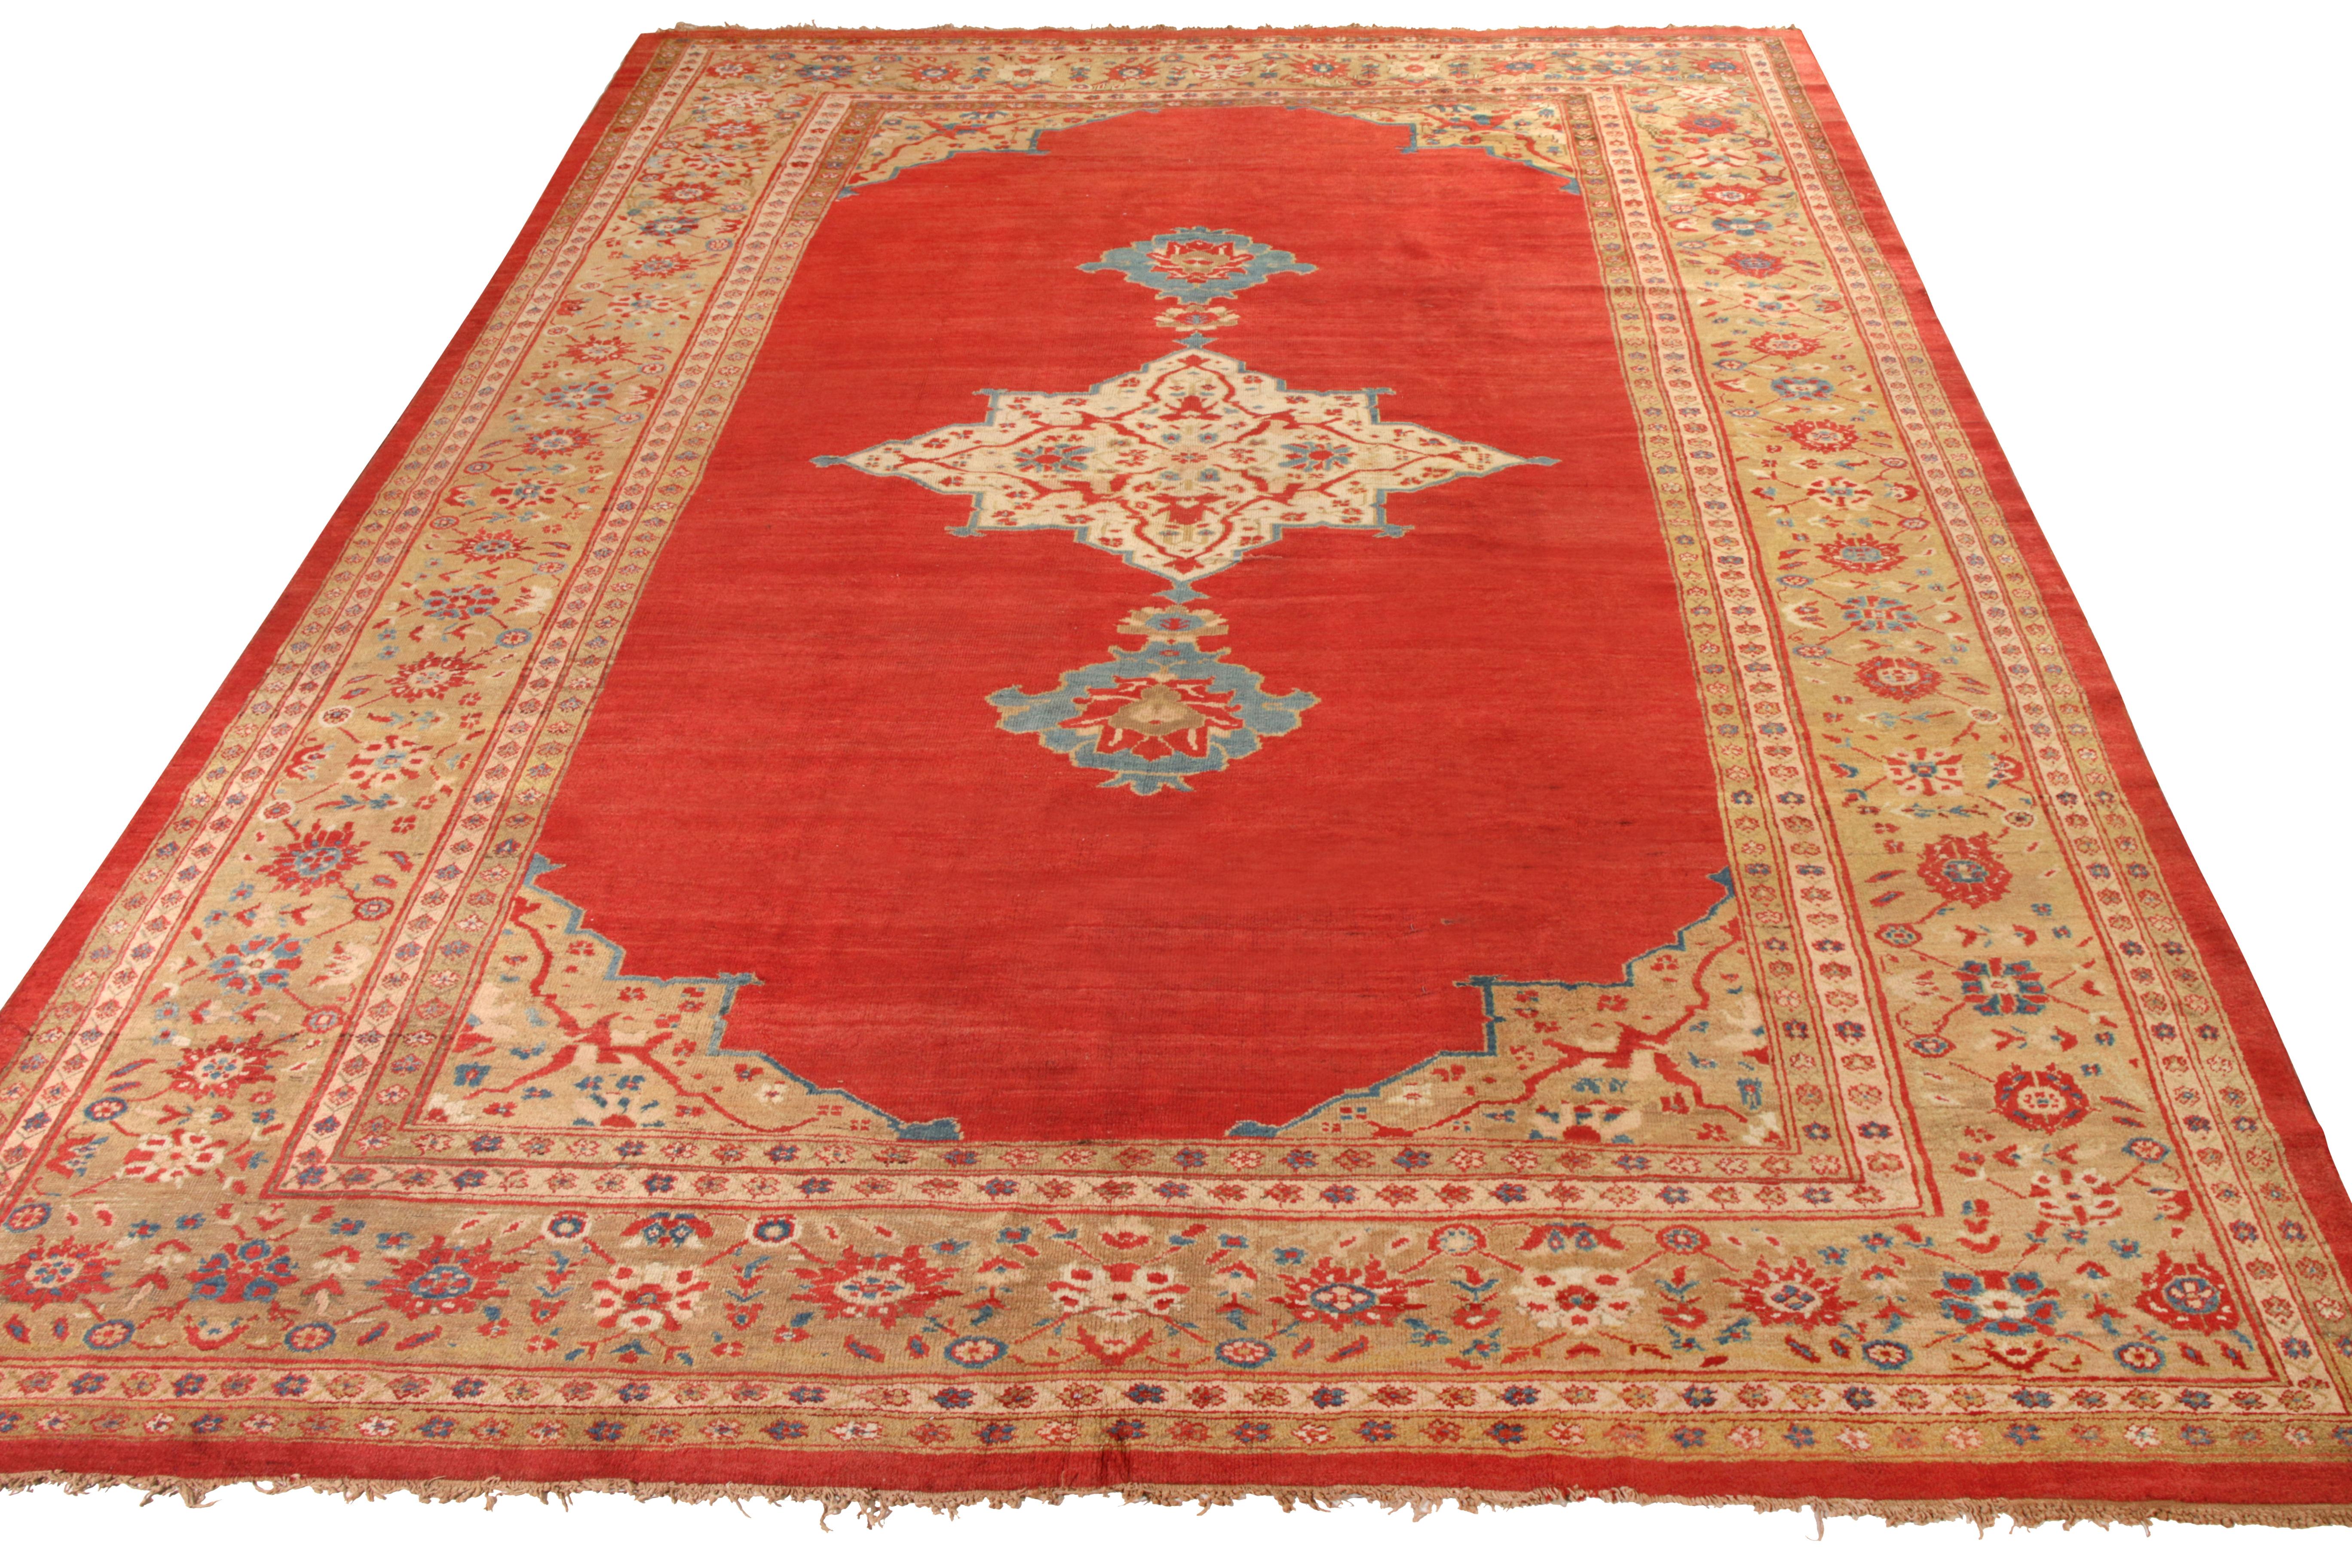 Hand knotted in wool circa 1880-1890, this antique 12x15 Sultanabad Persian rug enjoys a respected place in Rug & Kilim’s exclusive range of classic rugs. Emanating the finesse and style of the period, the rug features an open medallion pattern with